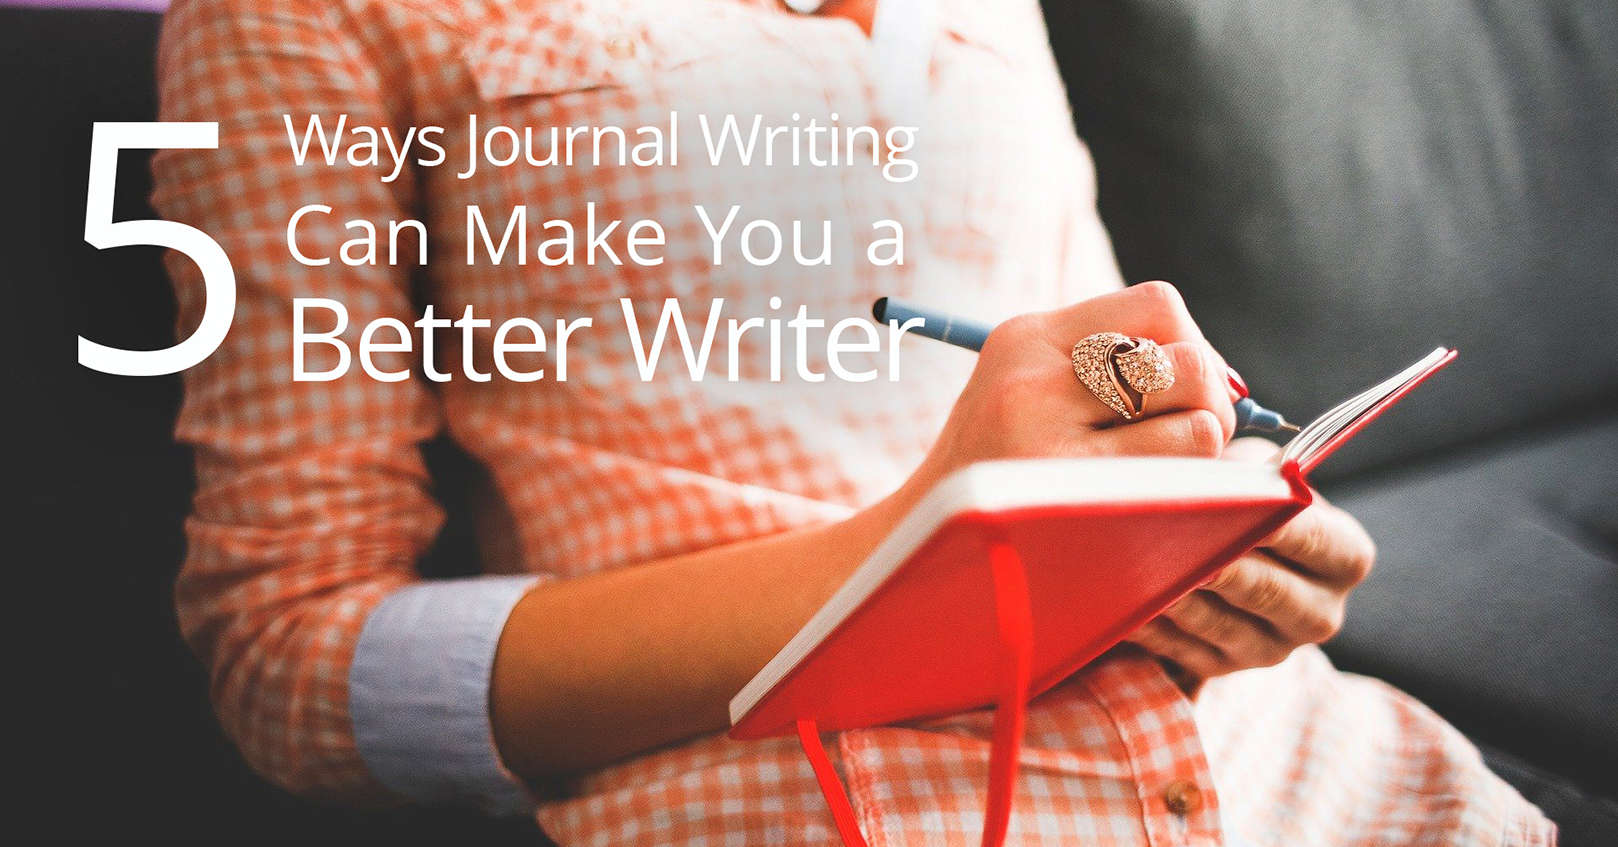 journal writing makes you a better writer